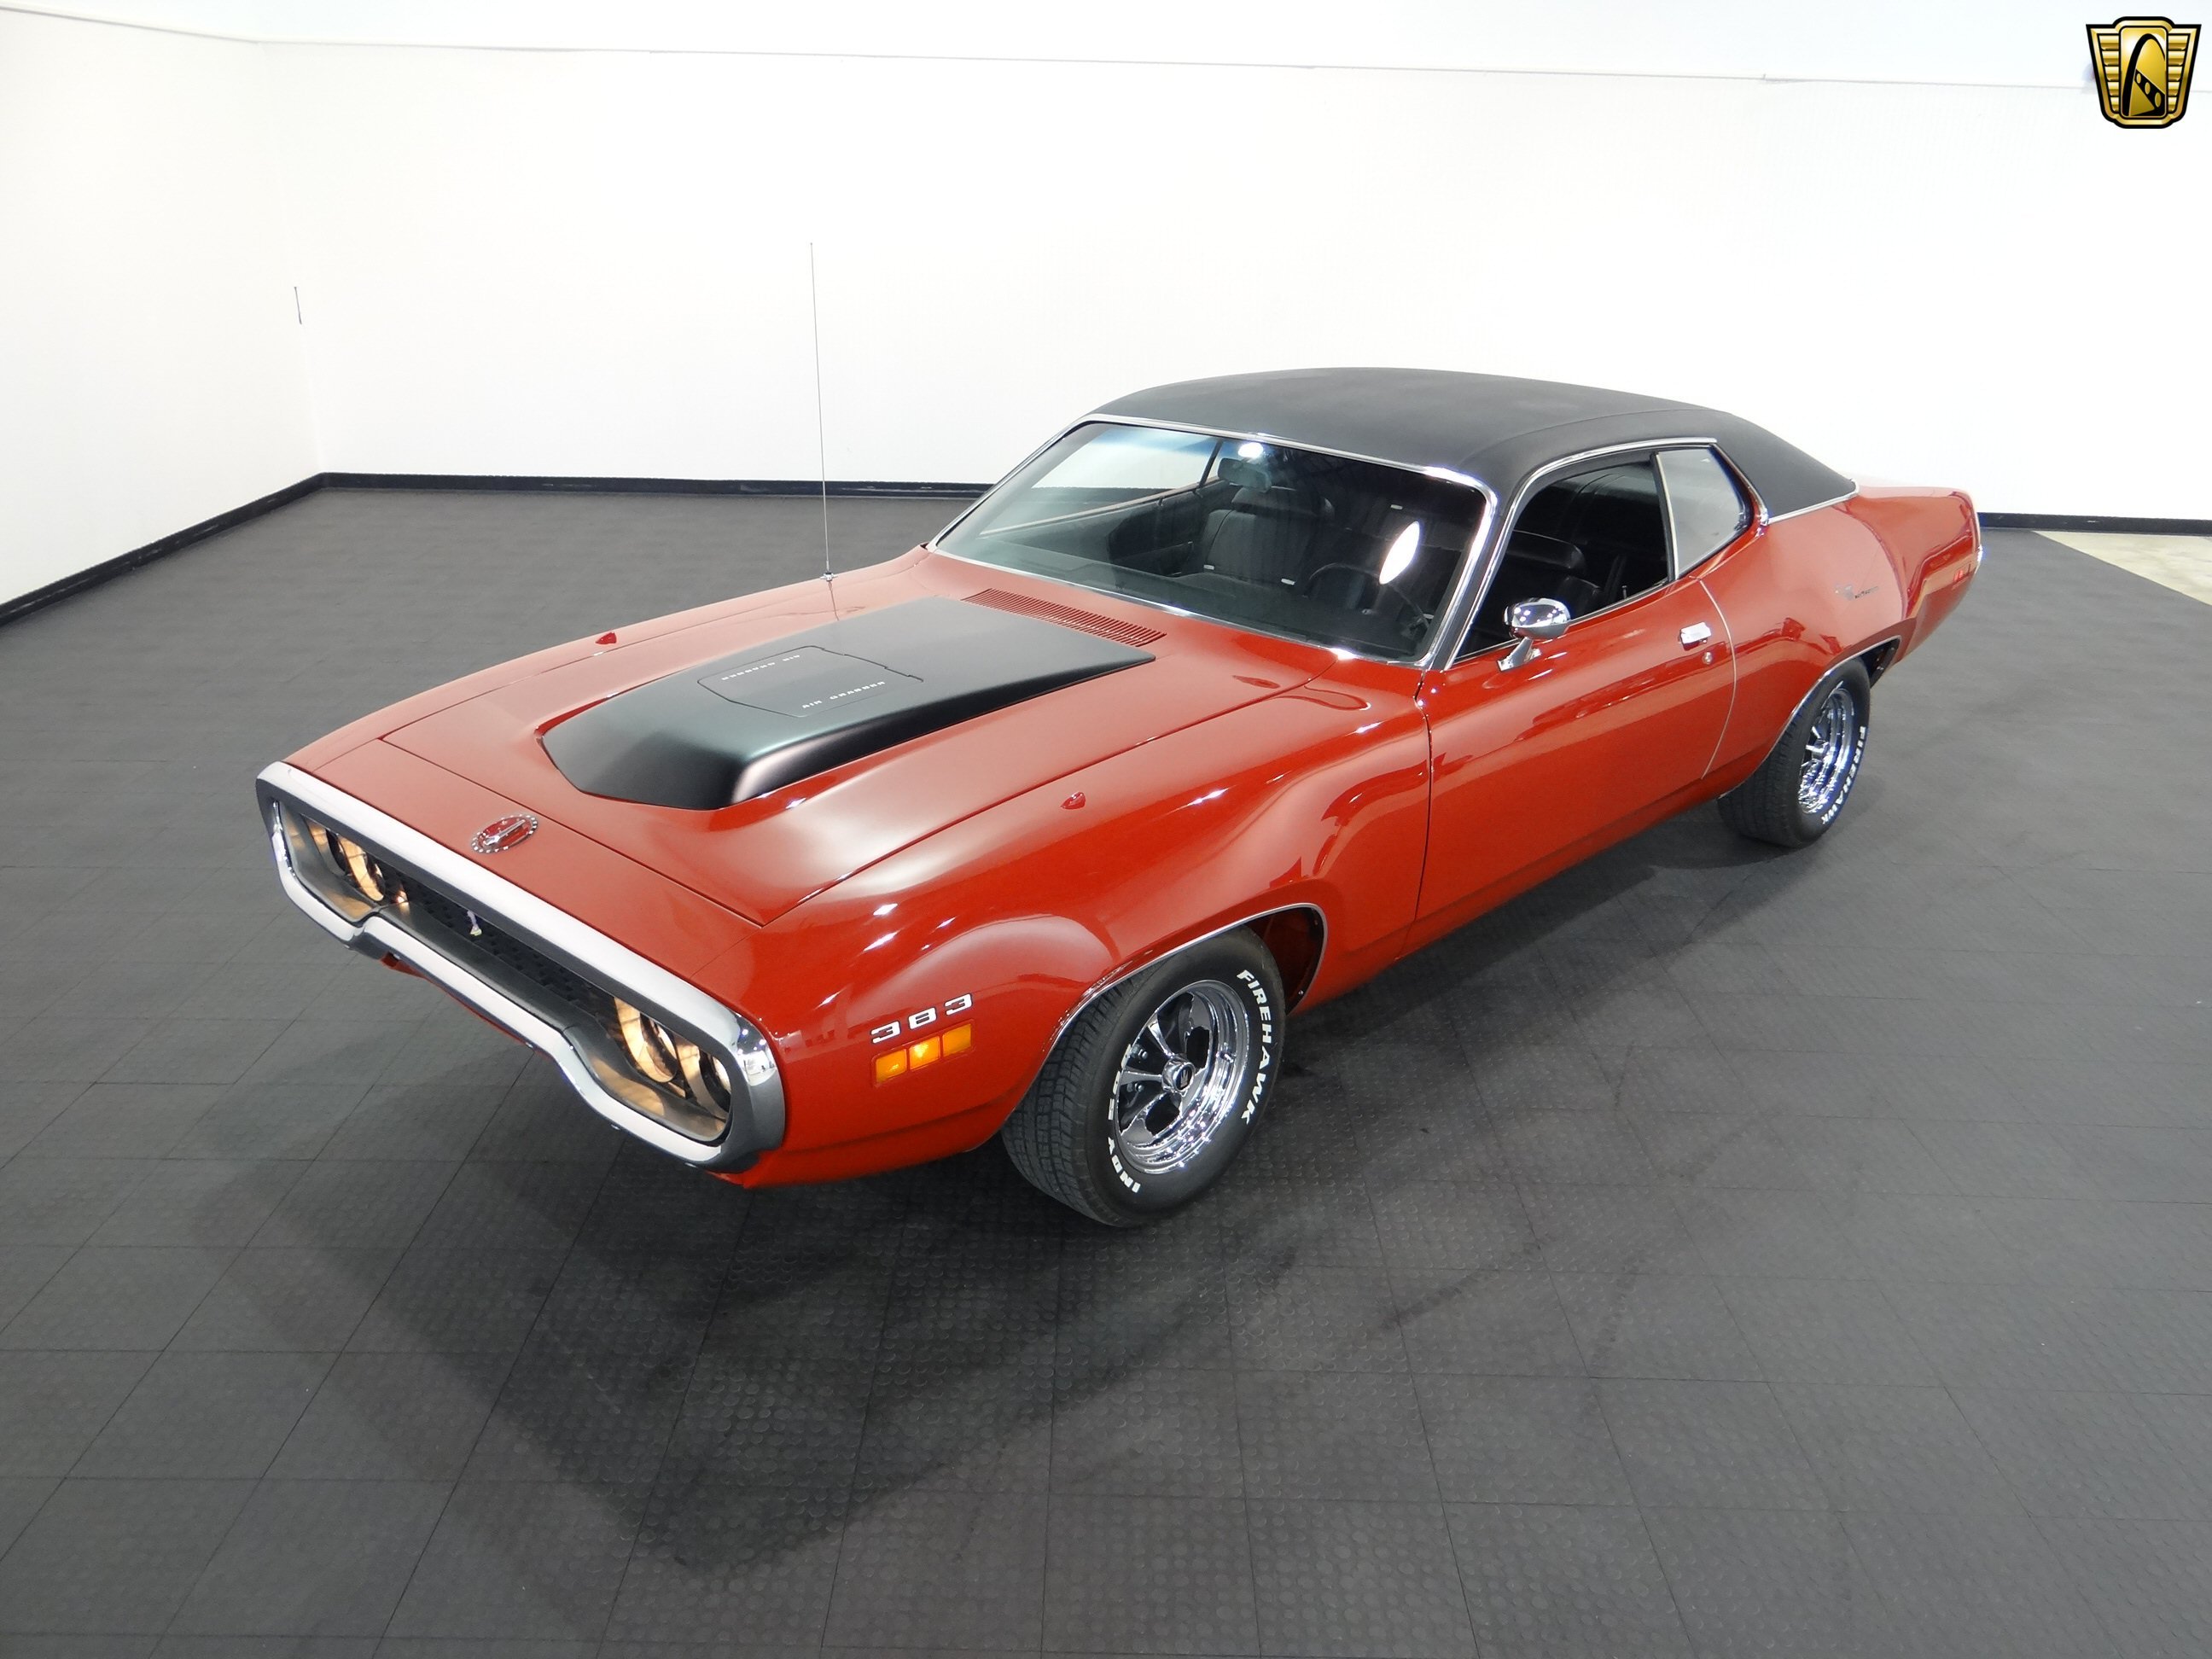 1971 Plymouth Road Runner cars classic wallpaper | 2592x1944 ...